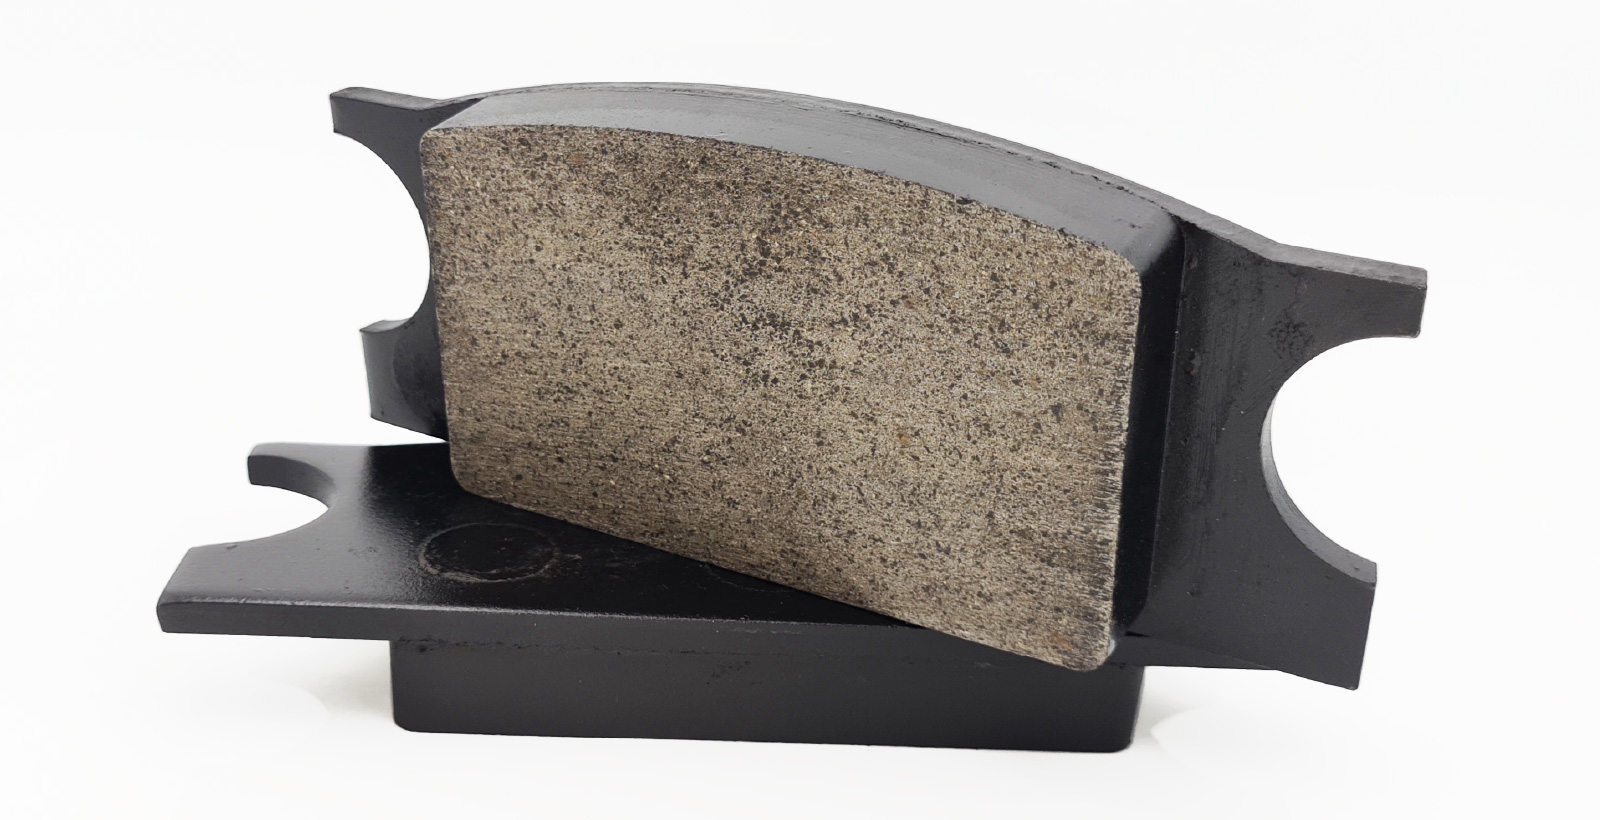 Commercial Brake Pads for Forestry and Timber Industry